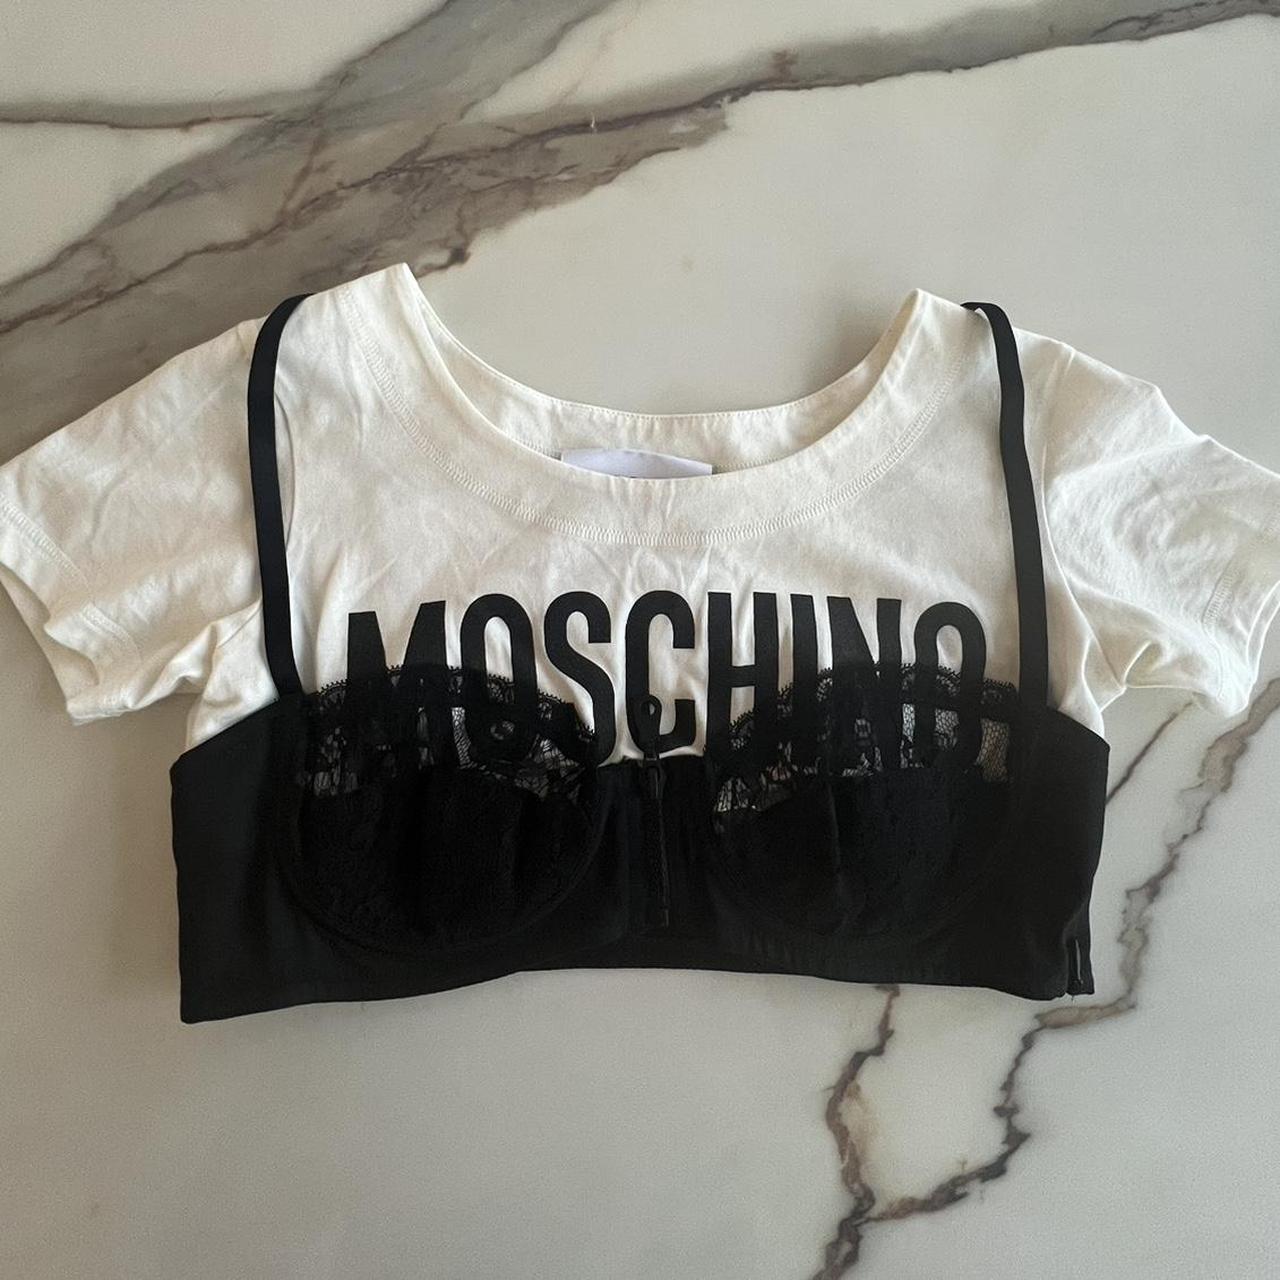 Moschino cropped tee Bra graphic Pixelated Size US - Depop